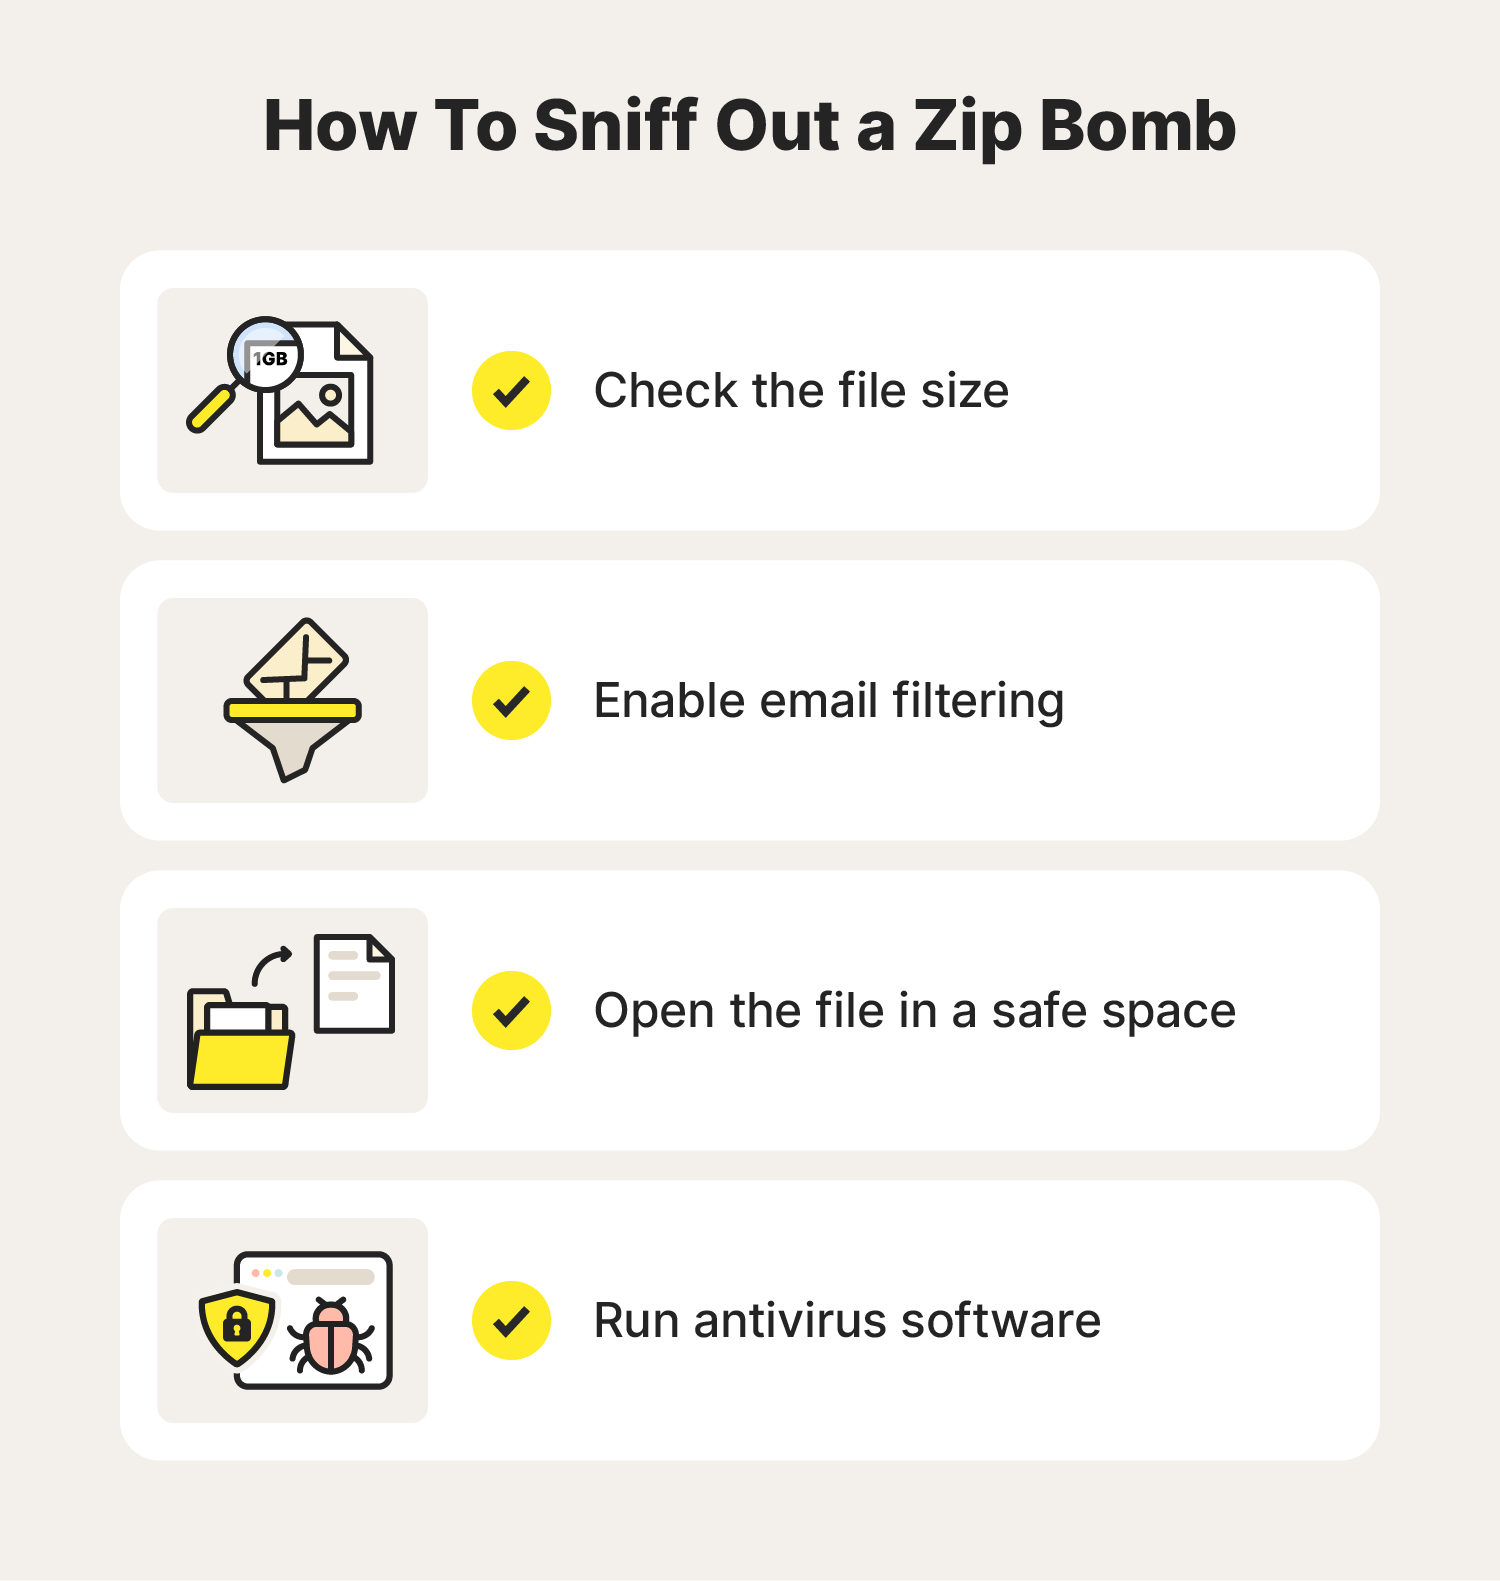 Tips to help you detect a zip bomb.